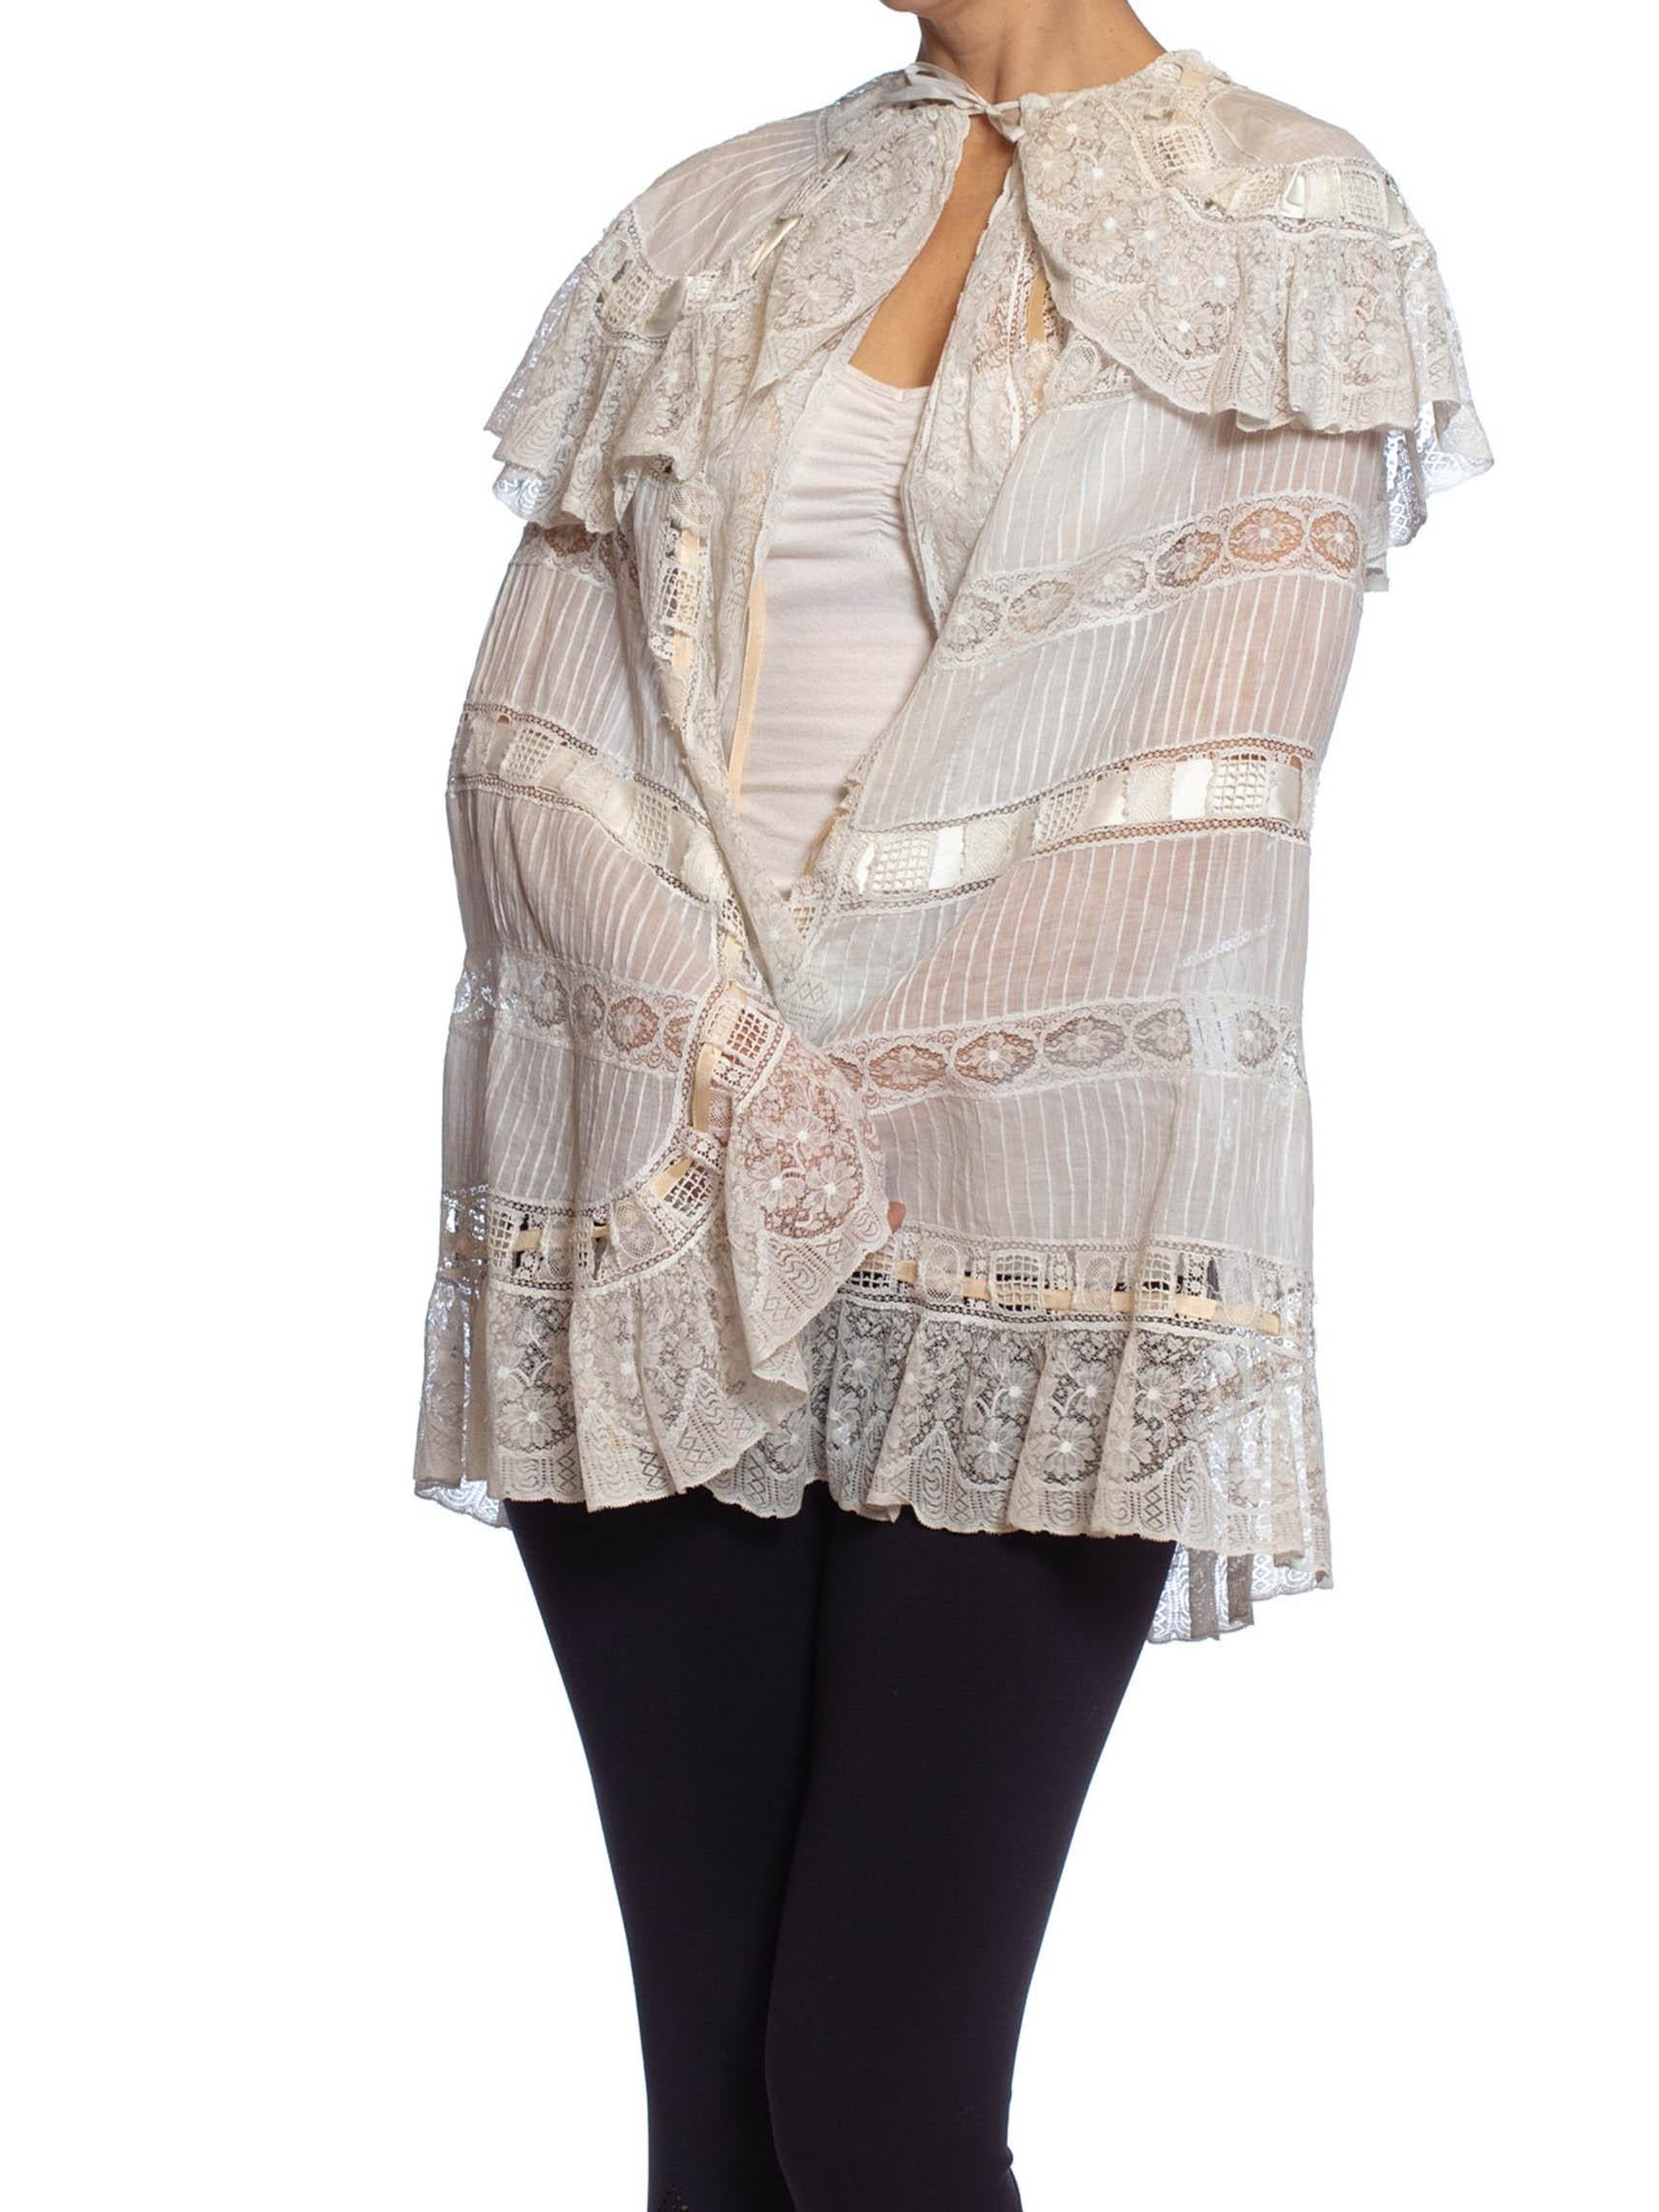 Gray Victorian White Cotton Voile & Lace Cape Entirely Pin-Tucked By Hand From Paris For Sale